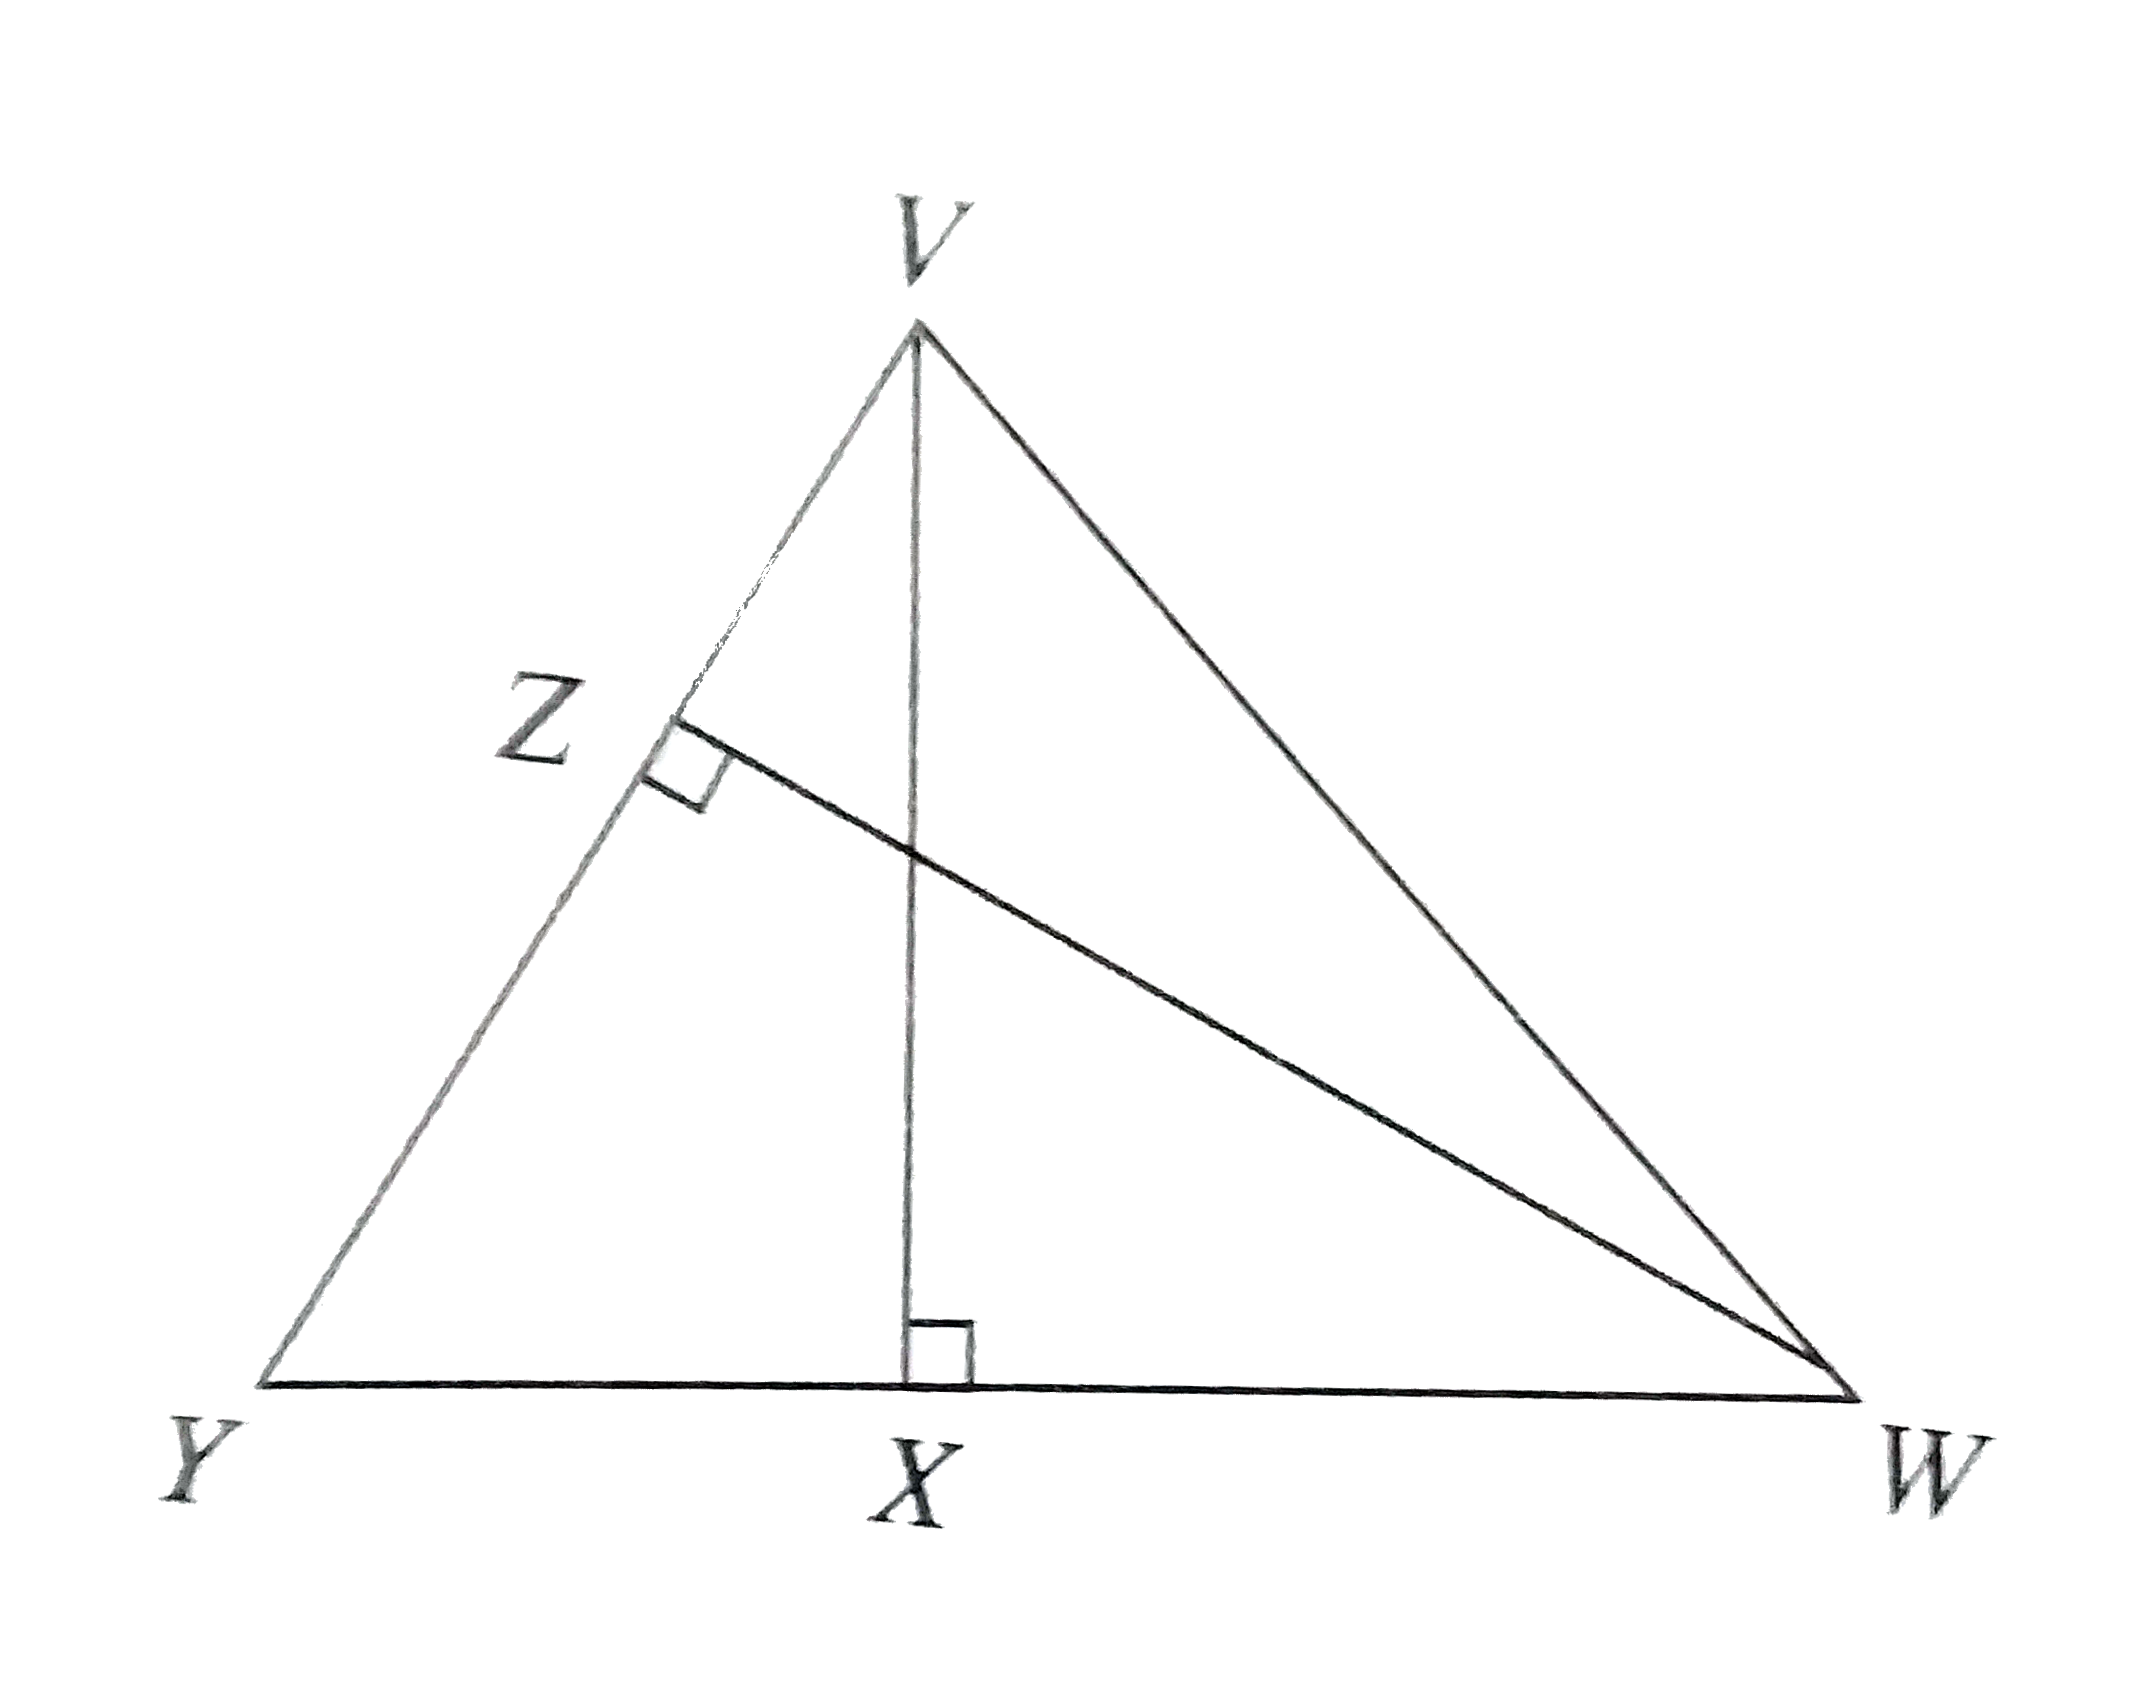 In Delta YVW in Figure, bar(VX) is the altitude to side bar(YW), and bar(ZW) is the altitude to side bar(YV). If bar(VX)=3, bar(YV)=4, and bar(ZW)=5, what is the length of side bar(YW)  ?